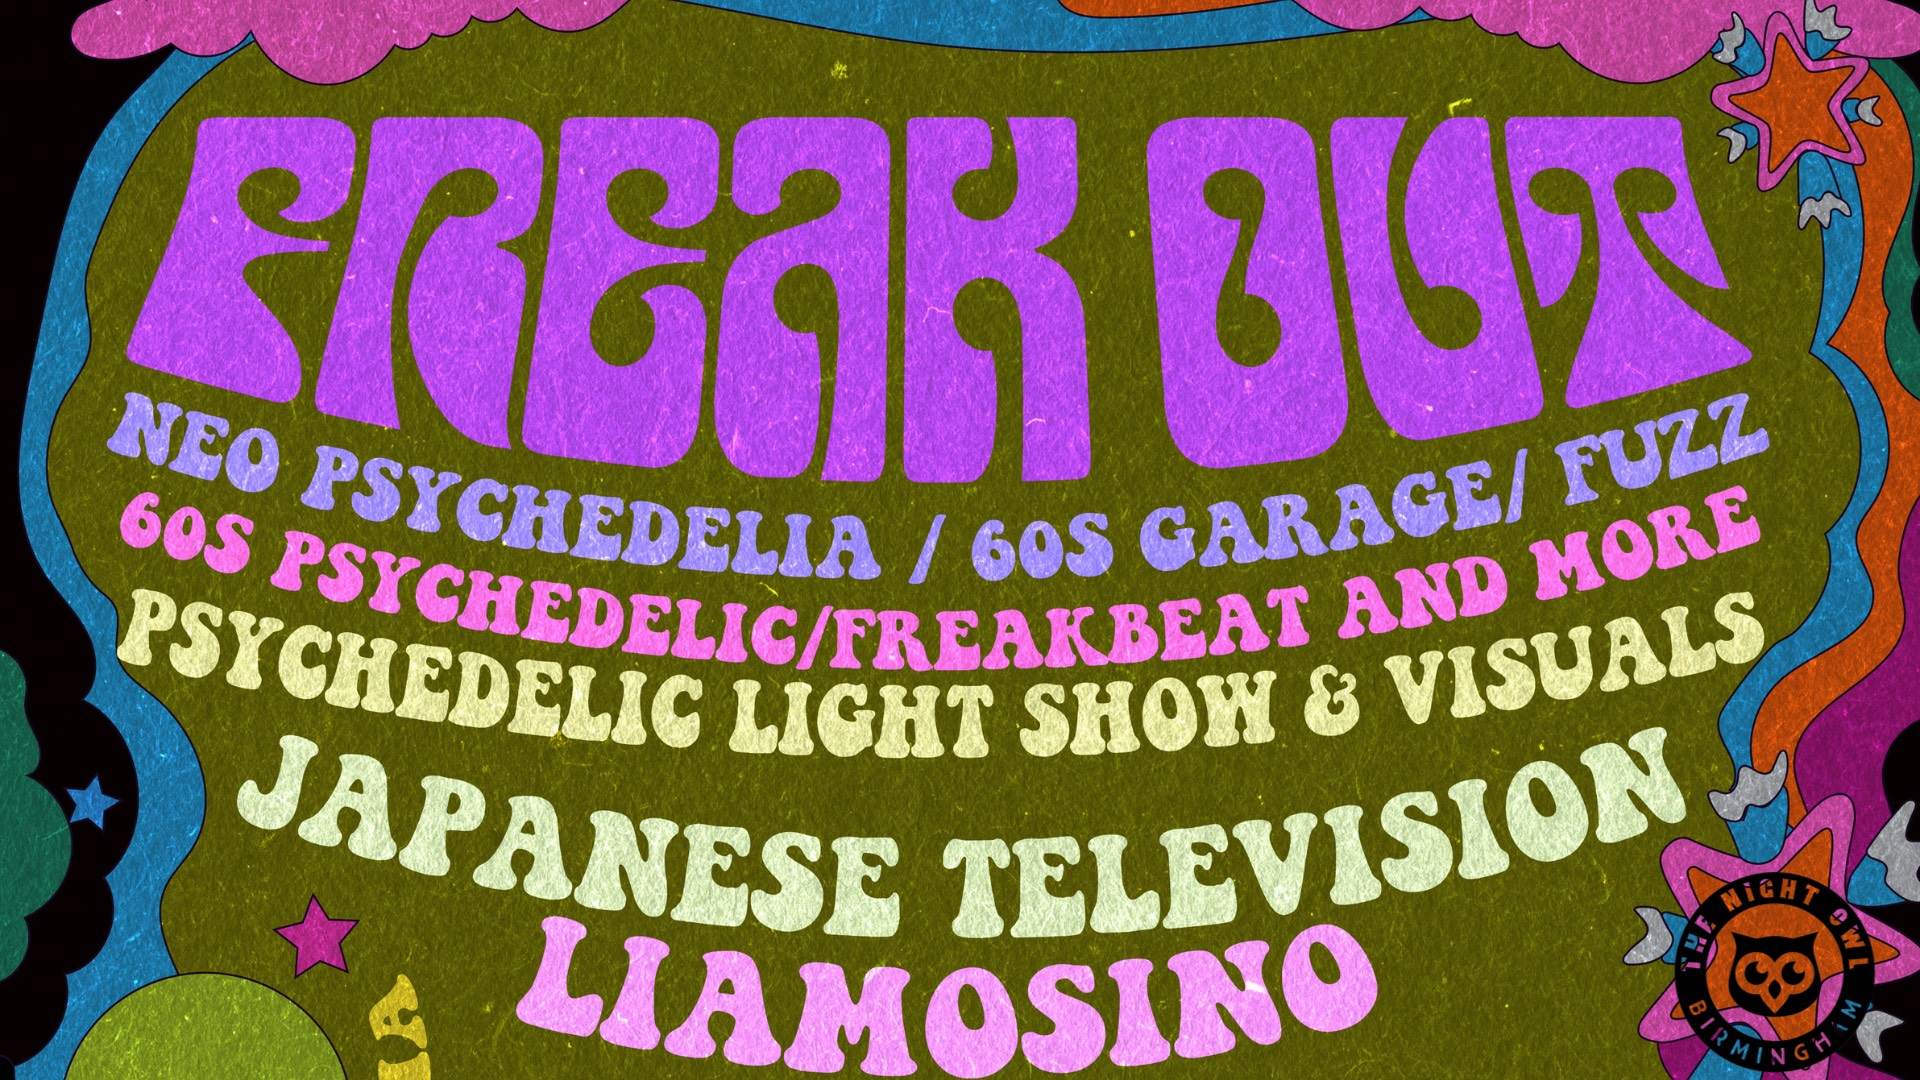 Freakout presents: Japanese Television with Liamosino - Página frontal